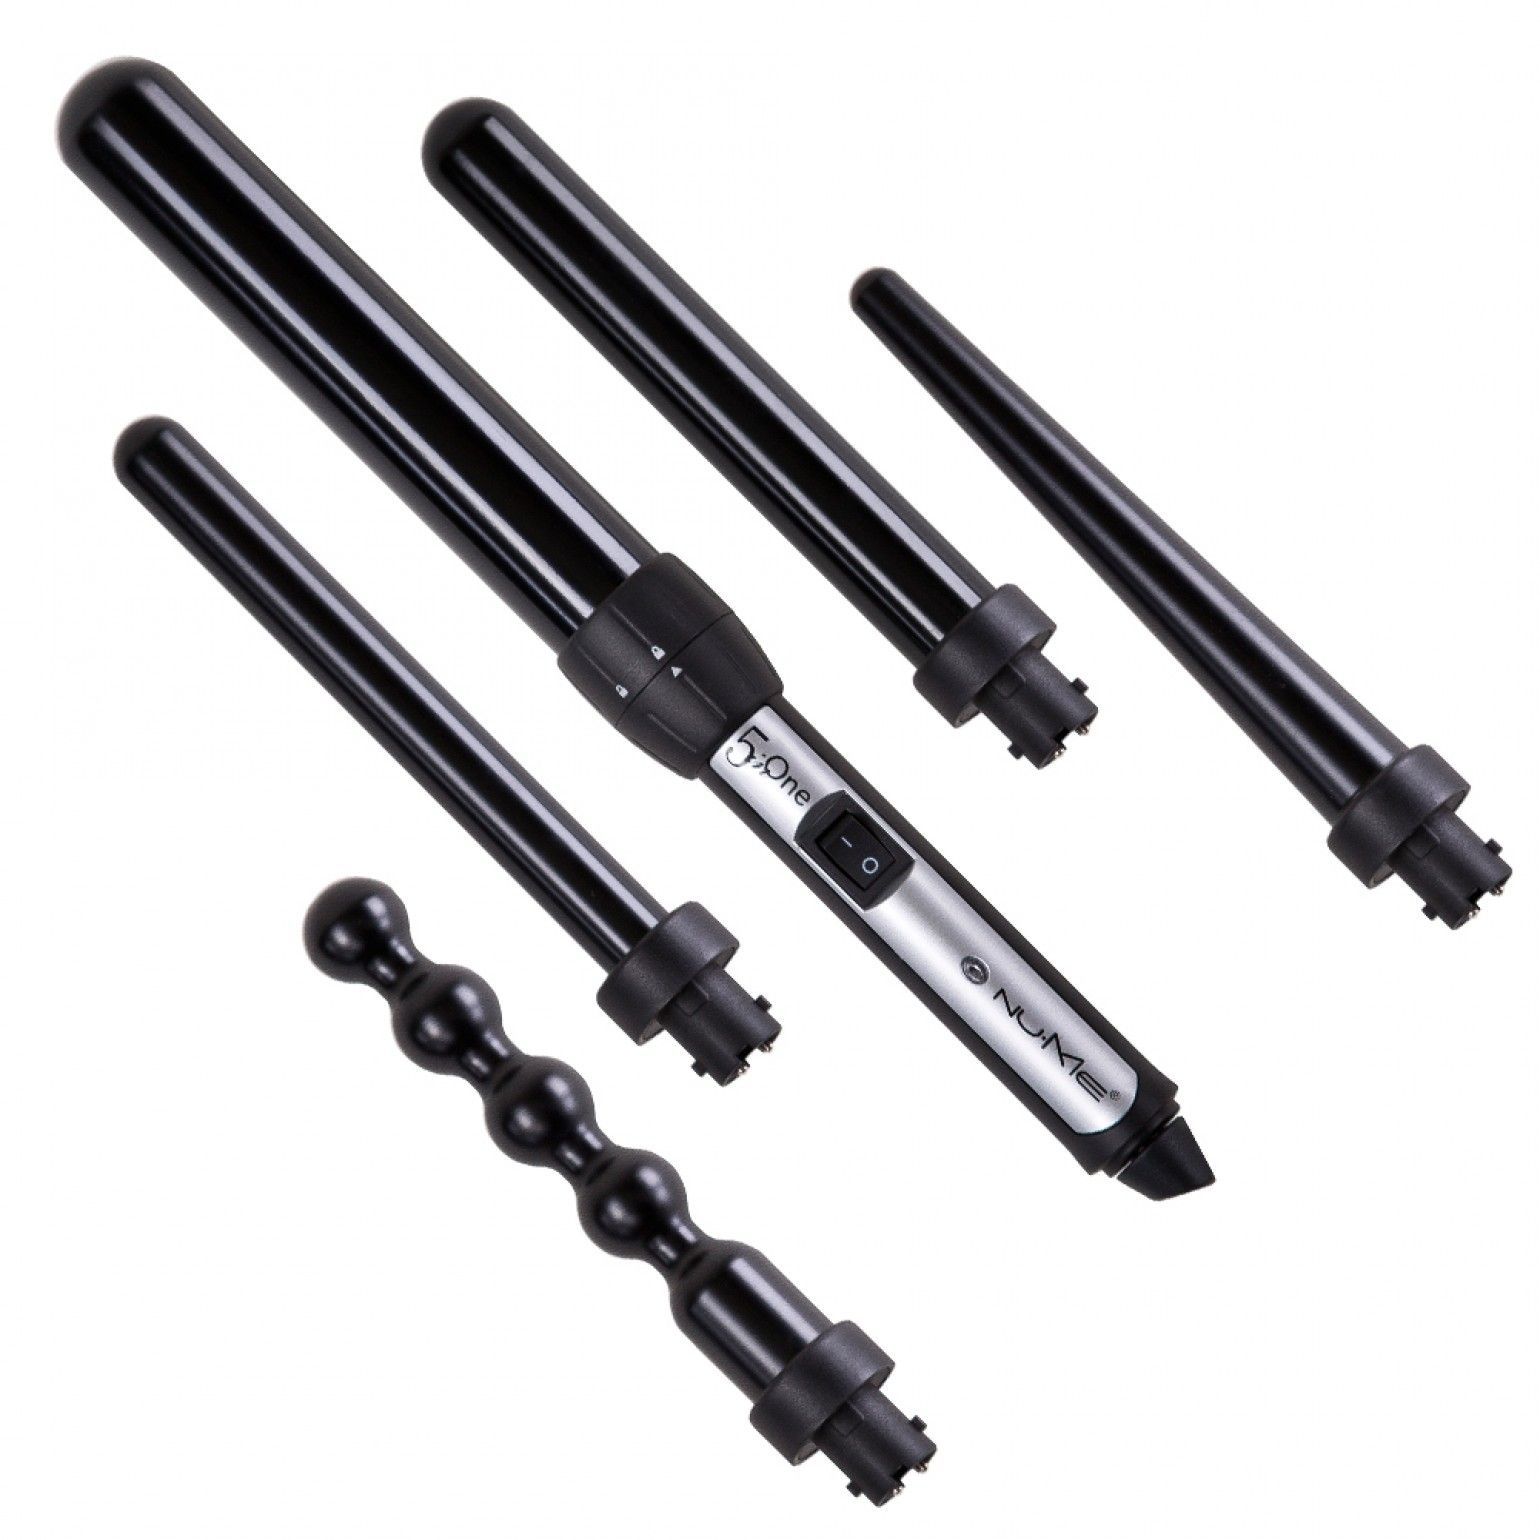 Best curling wand set!  Comes with 5 interchangeable heat barrels for different curls and shapes. I definitely recommend this!